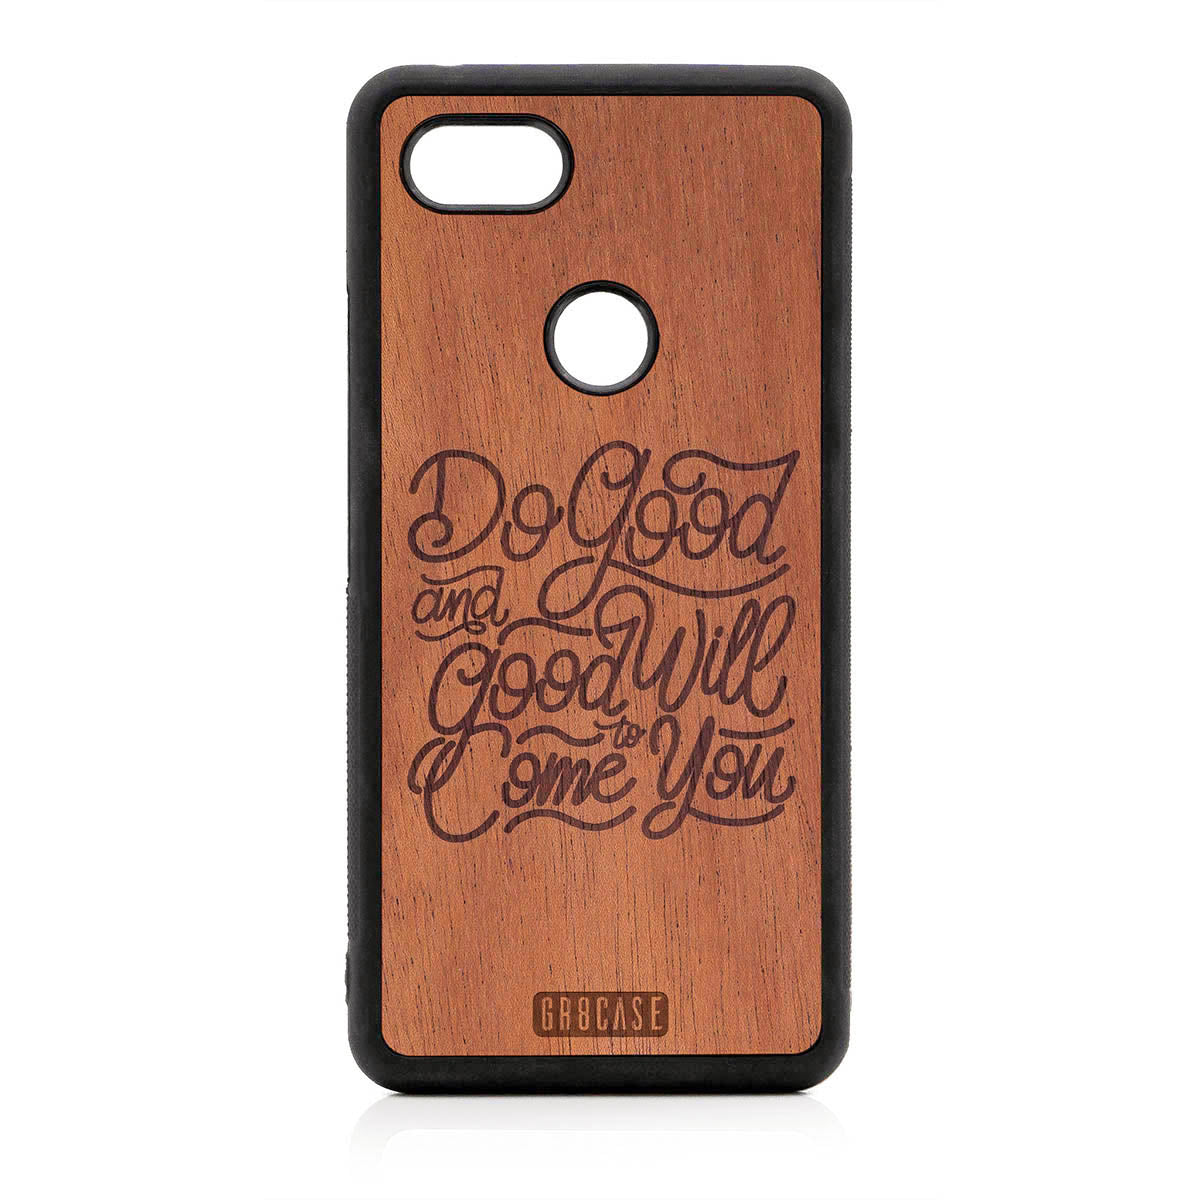 Do Good And Good Will Come To You Design Wood Case For Google Pixel 3 XL by GR8CASE